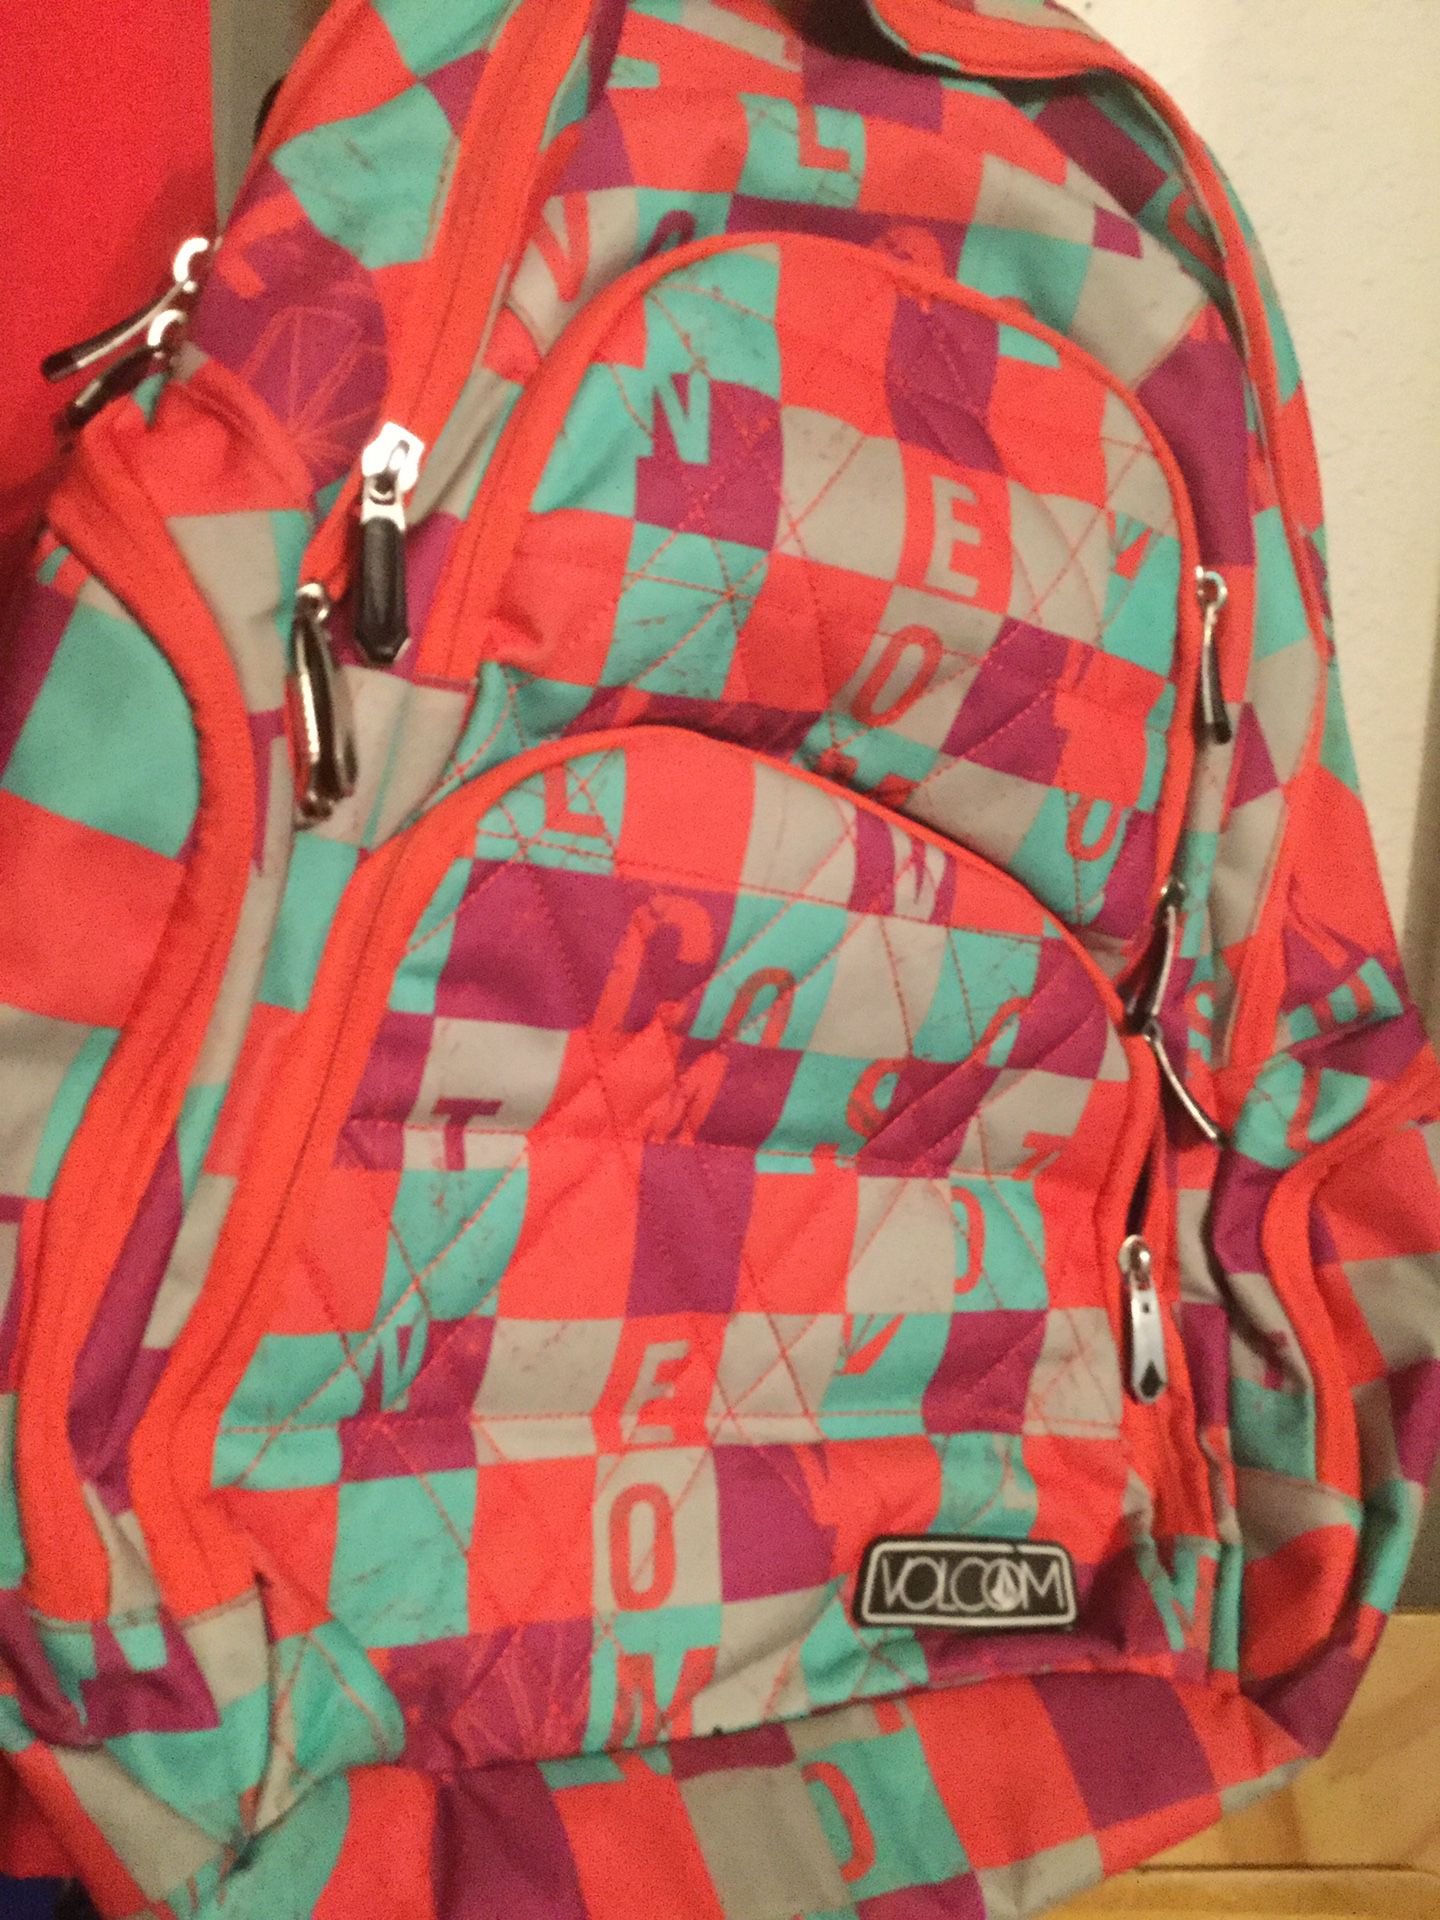 VOLCOM Backpack is NEW. PRICE REDUCED!